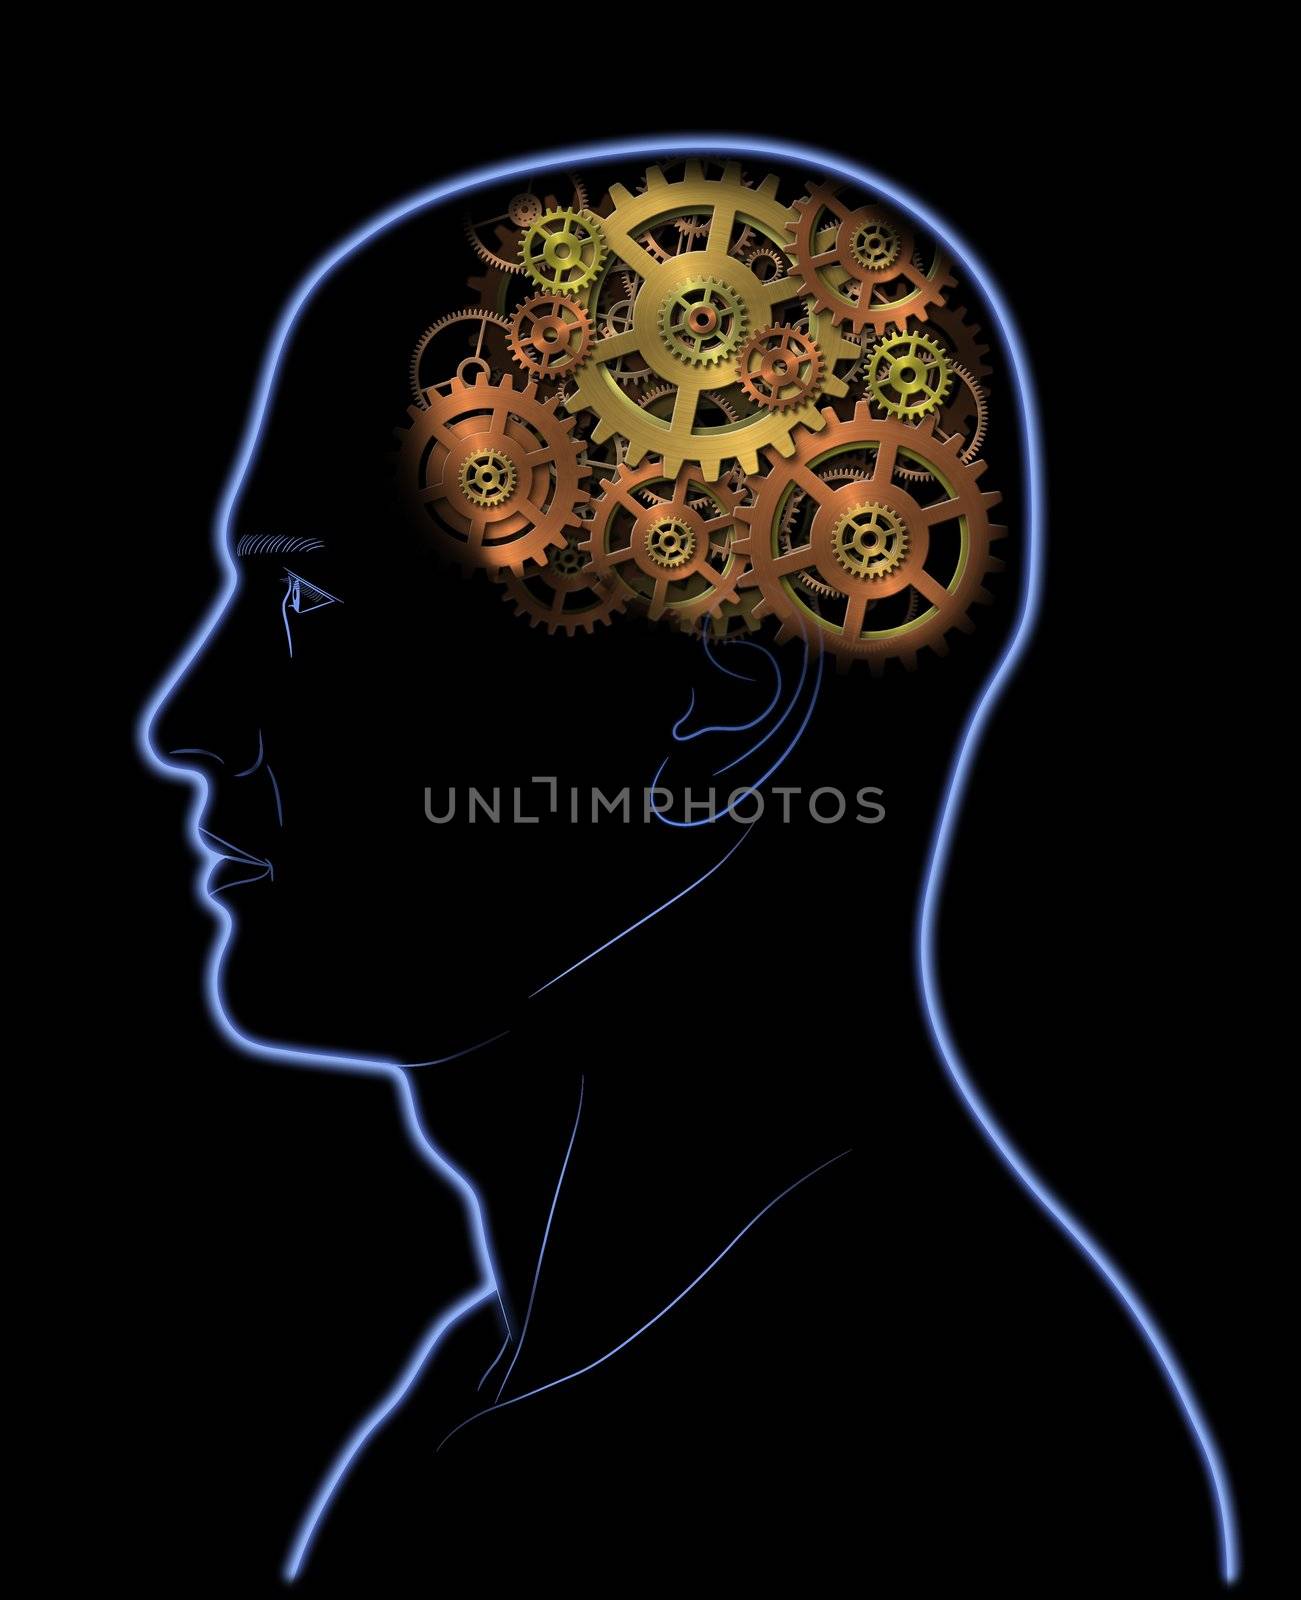 Abstract image - Gears In The Head - Brain - Intelligence - Thinking